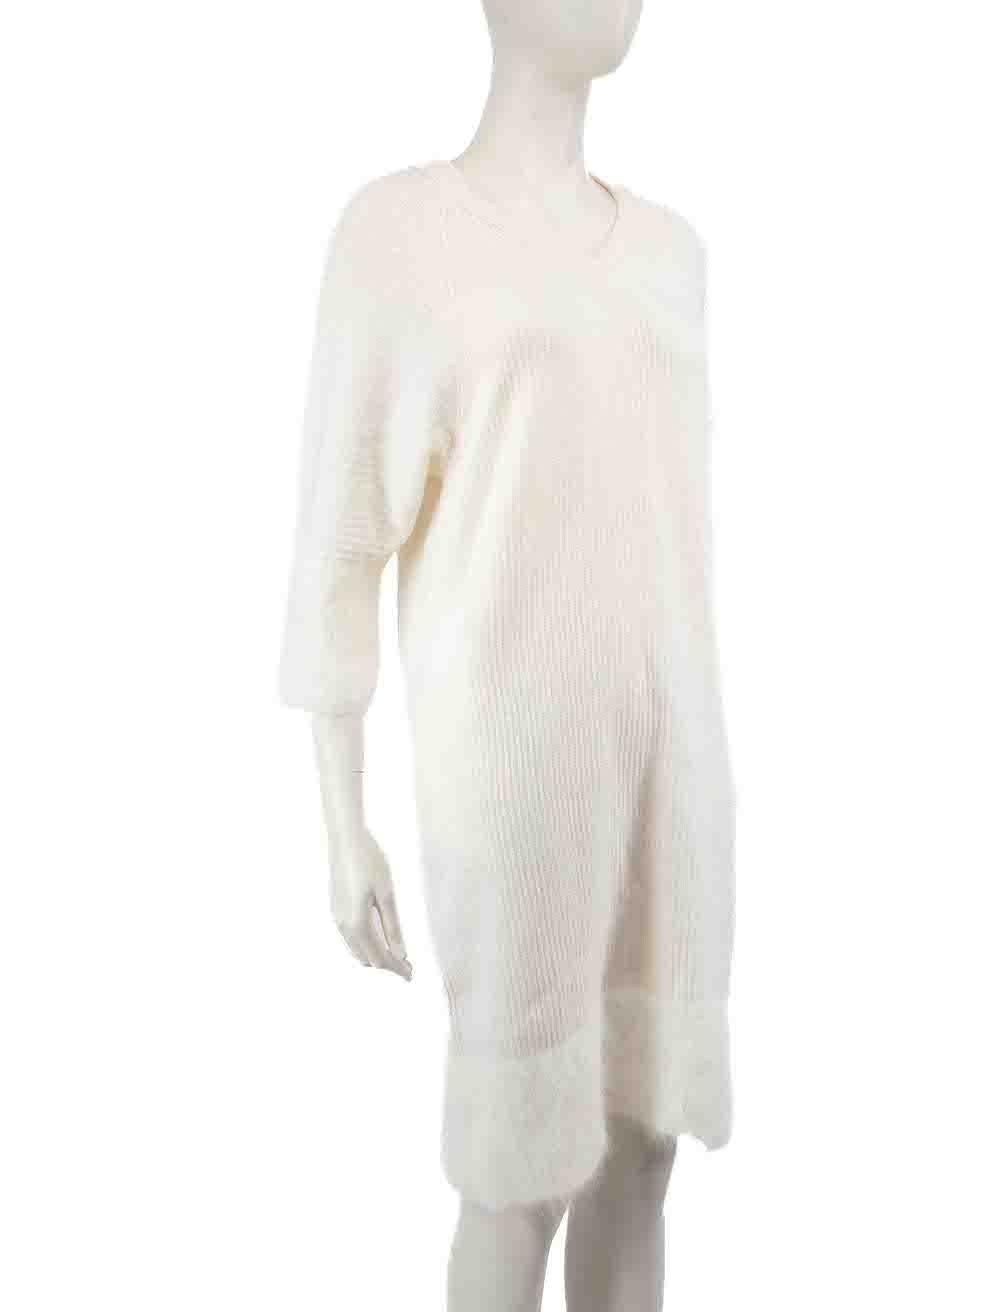 CONDITION is Very good. Minimal wear to knit dress is evident. There is a small mark to the front of the dress on this used Lorena Antoniazzi designer resale item.
 
 
 
 Details
 
 
 White
 
 Wool
 
 Knit dress
 
 Long sleeves
 
 Round neck
 
 Knee